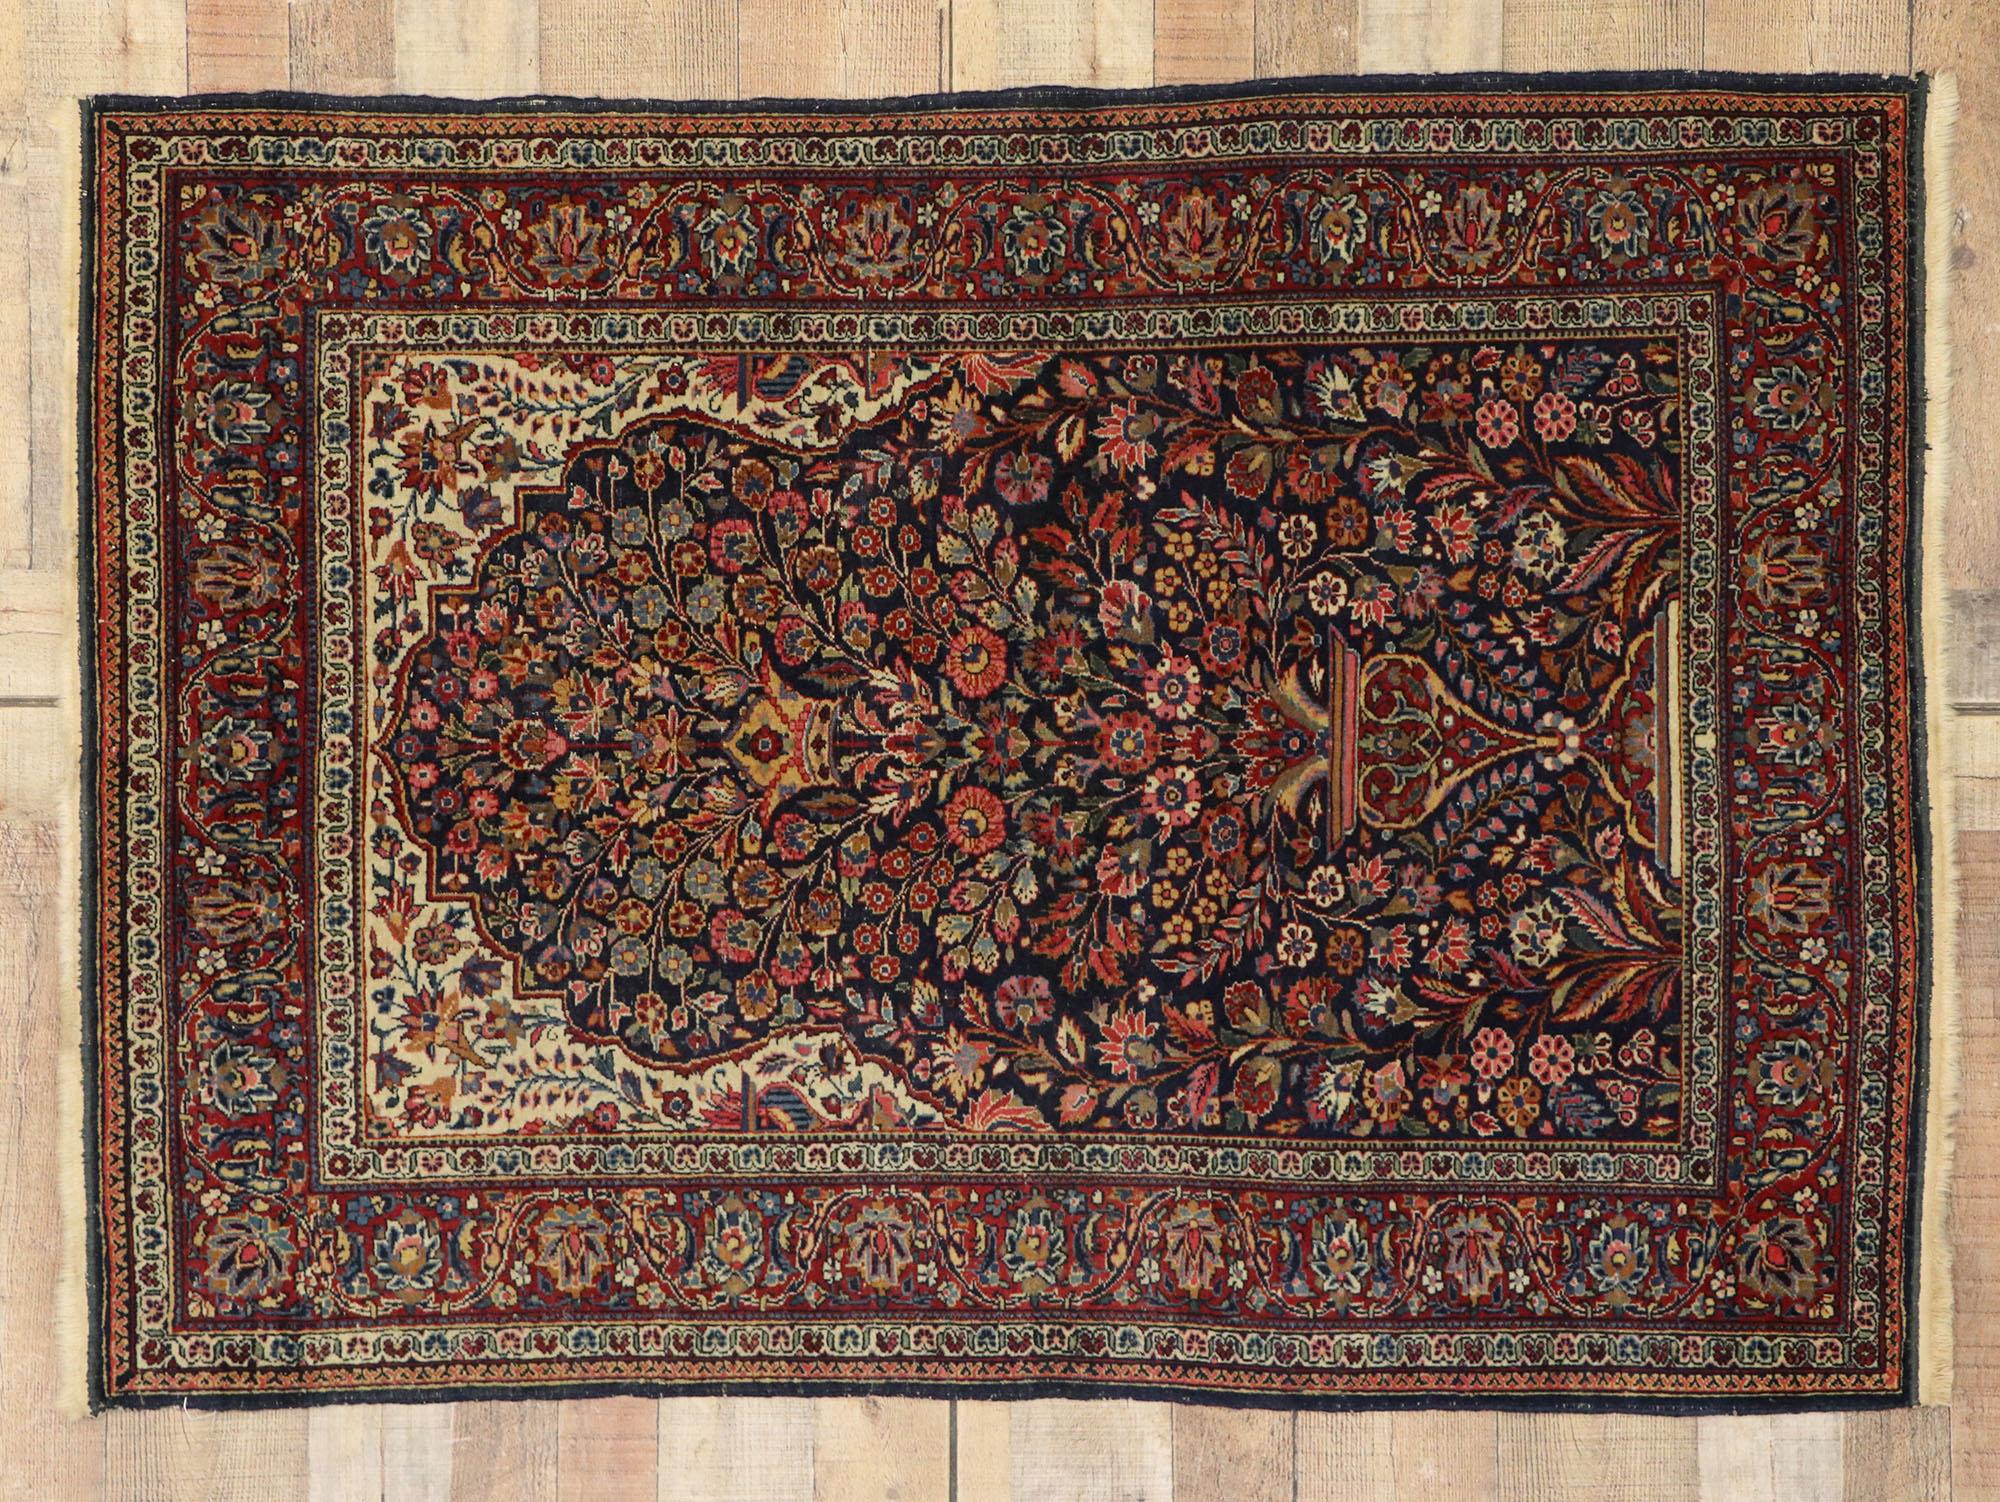 77549, antique Persian Kashan vase prayer rug with Art Nouveau style. Give the look of woven wonders and decorative elegance with hand knotted wool antique Persian Kashan vase prayer rug. Showcasing a directional prayer rug layout with a mihrab